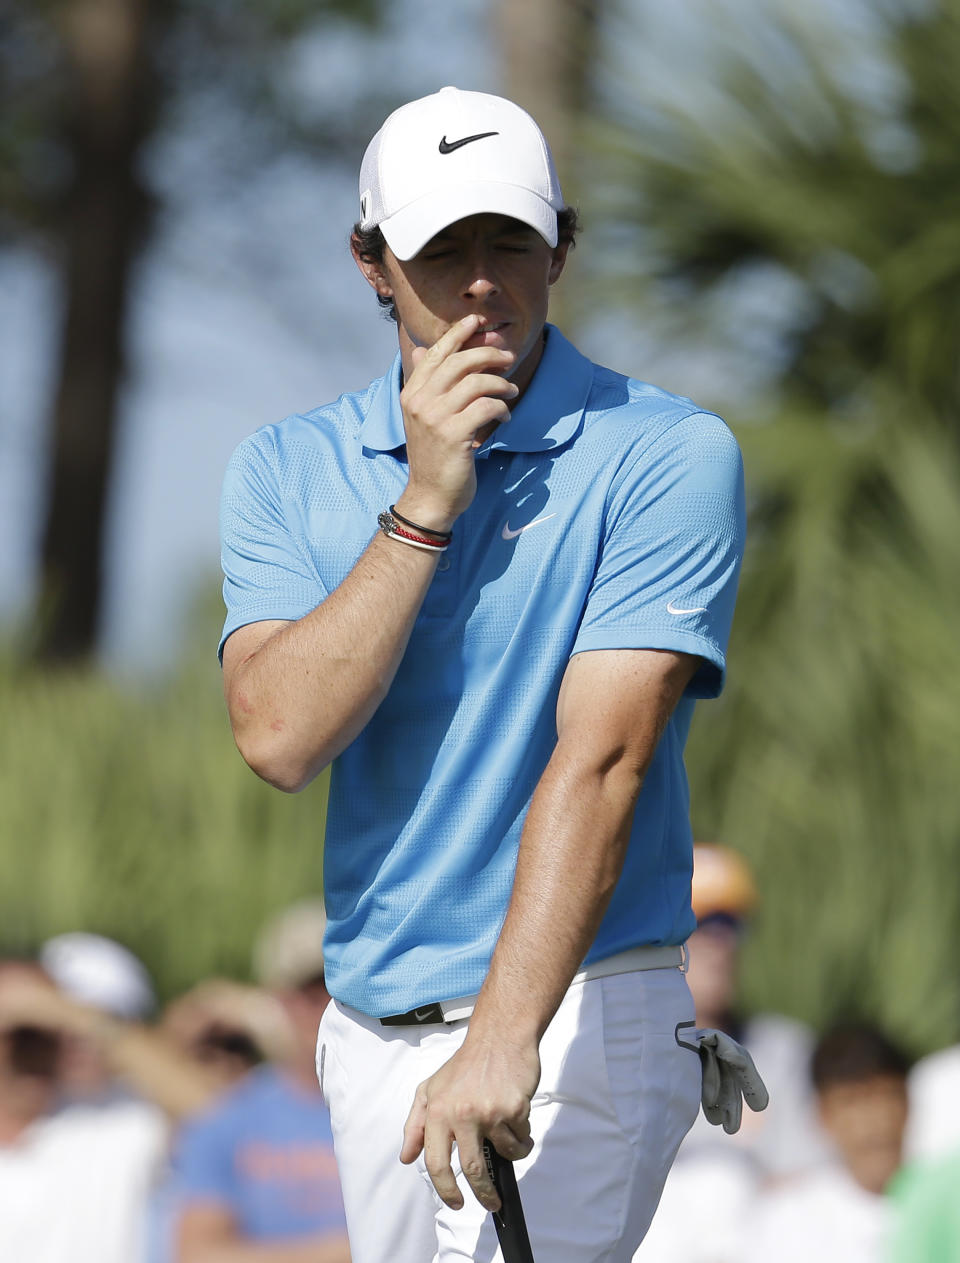 Rory McIlroy, of Northern Ireland, watches after hitting on the eighth hole during the final round of the Honda Classic golf tournament on Sunday, March 2, 2014, in Palm Beach Gardens, Fla. (AP Photo/Lynne Sladky)